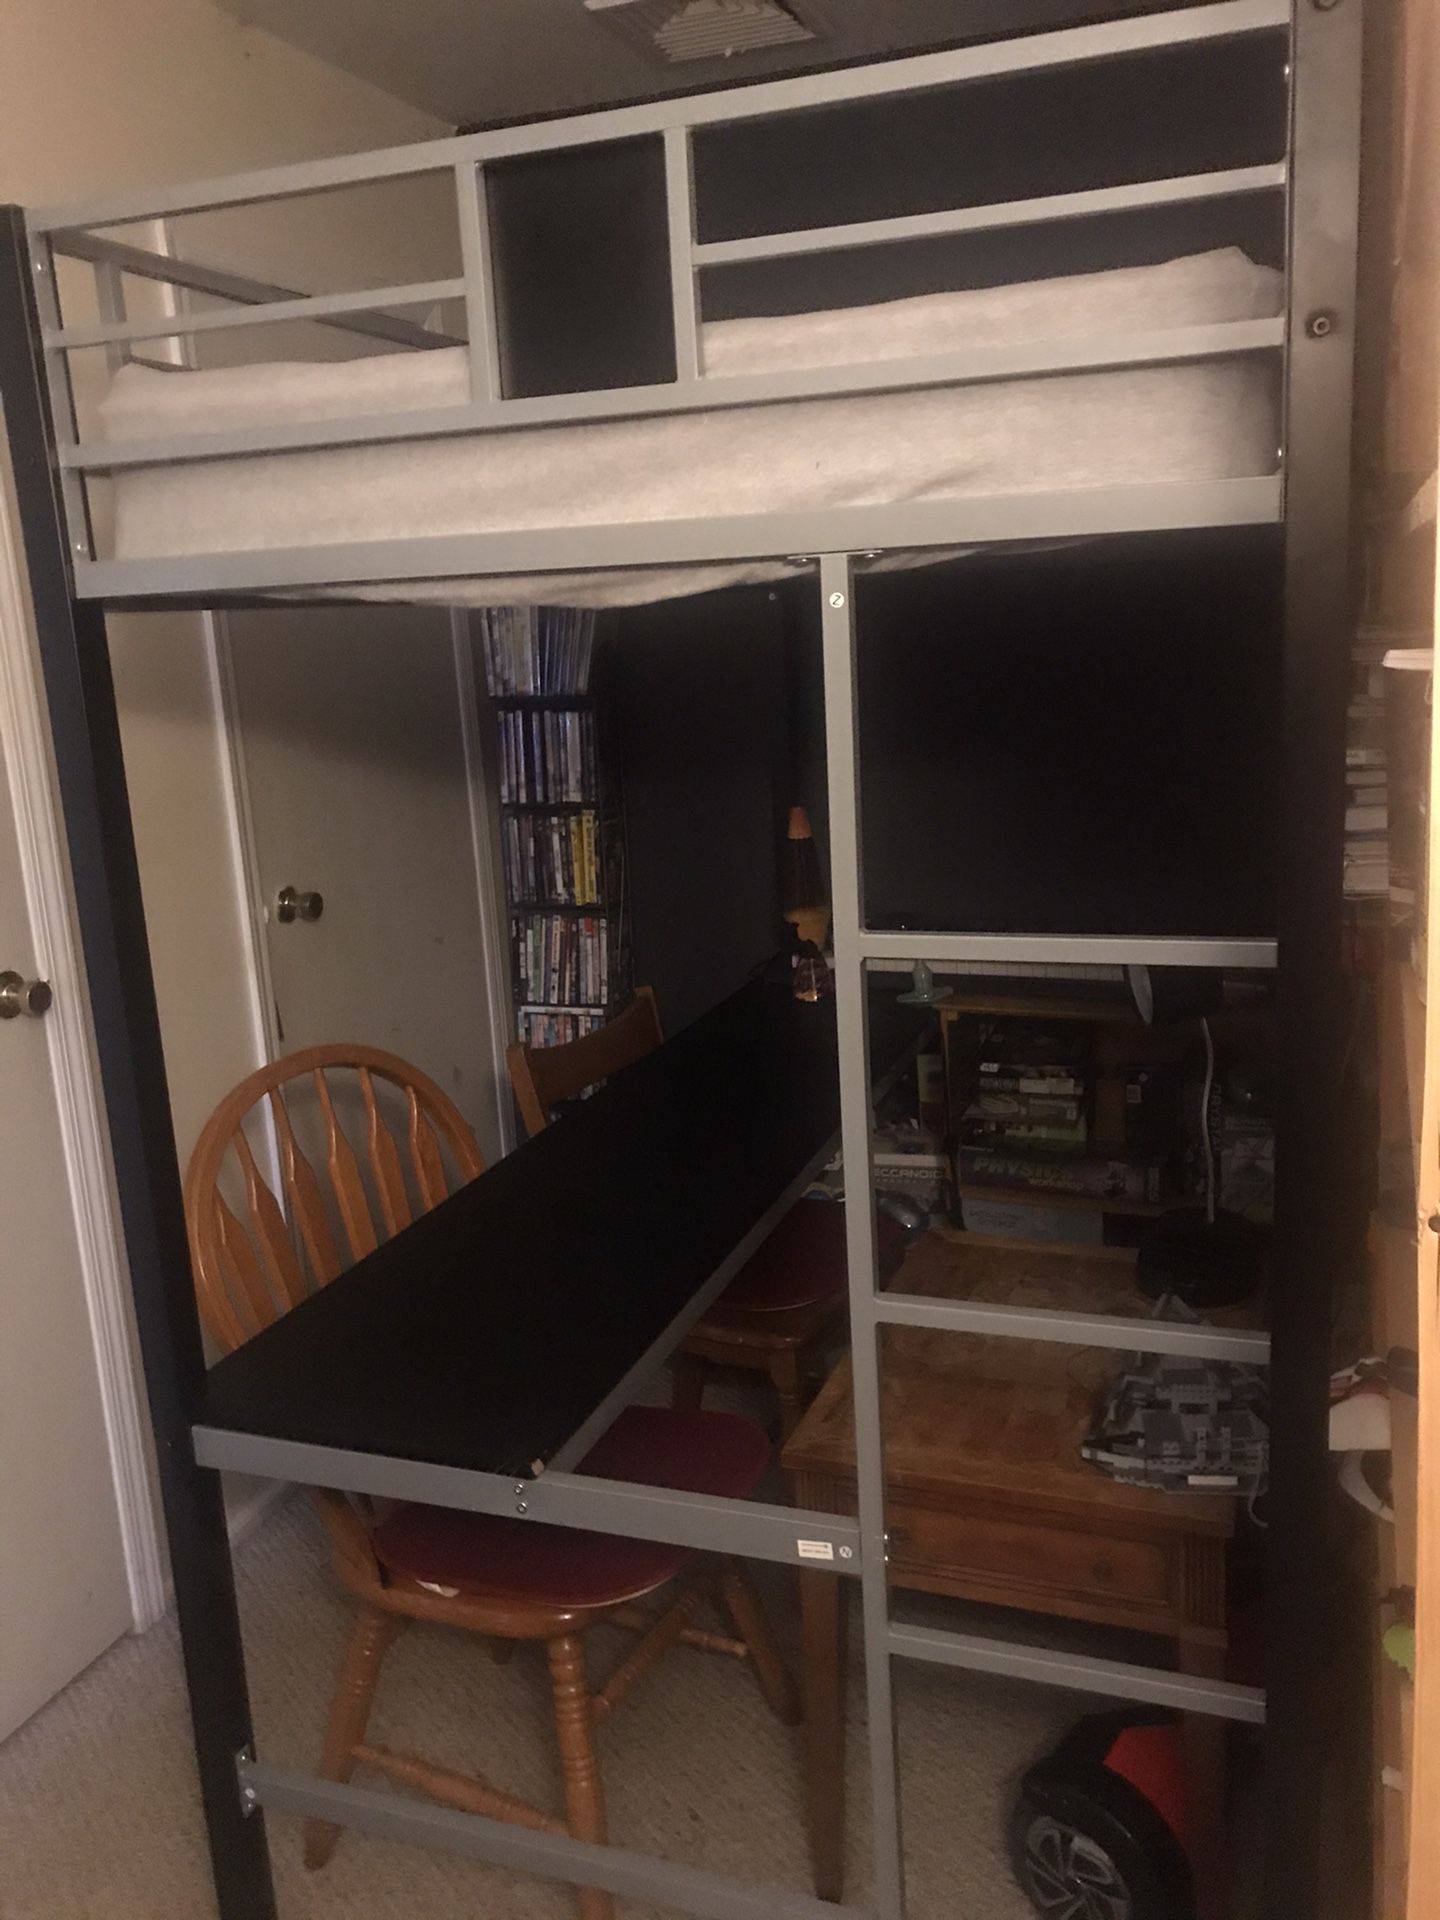 Bunk bed with desk underneath.